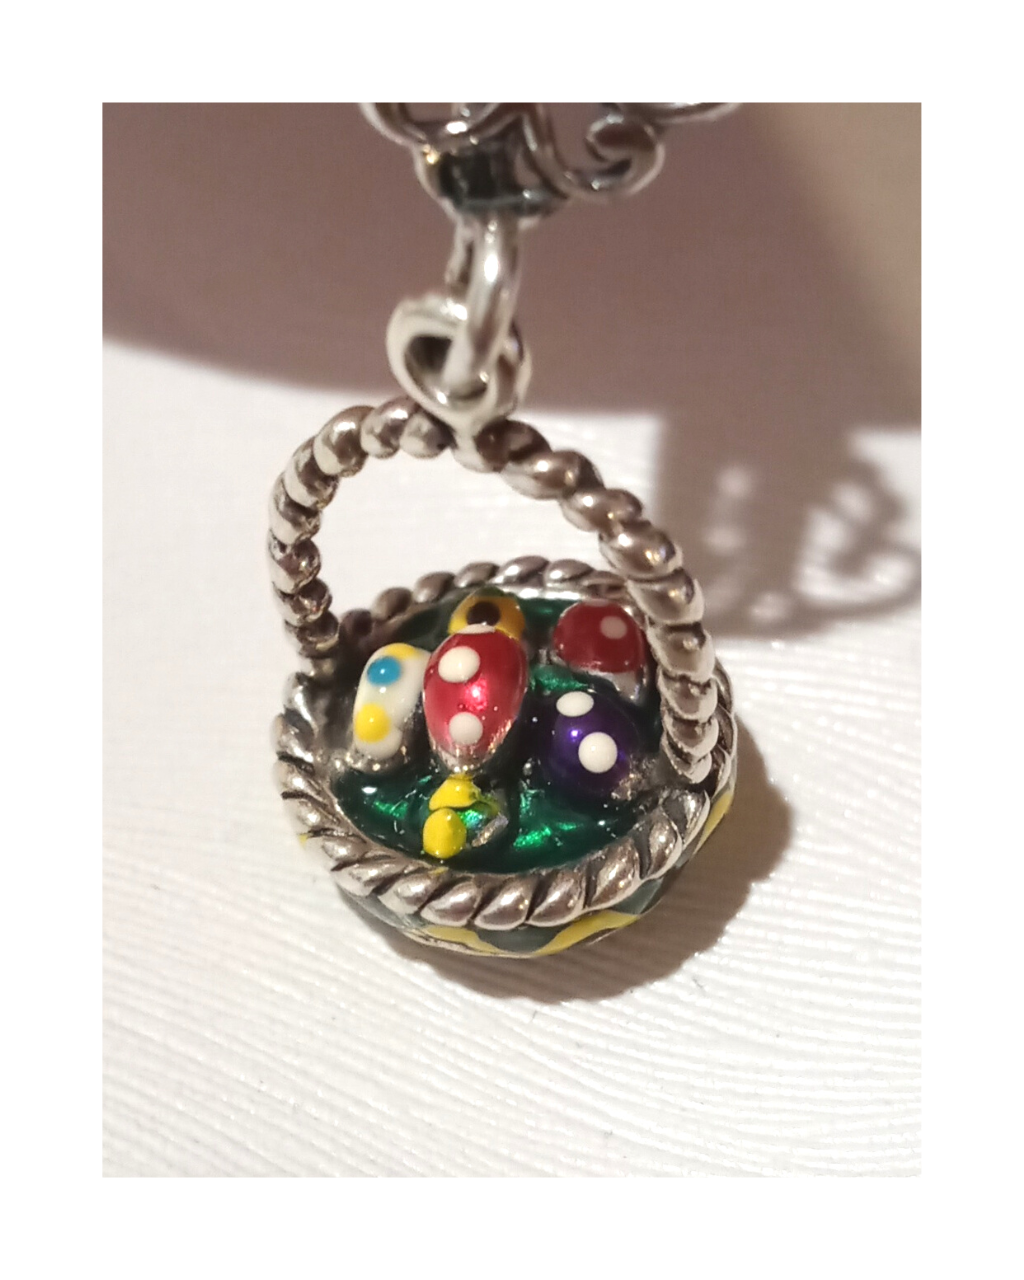 Exclusive Amazing Sterling Hand-enameled Wearable Art 3-D Easter Basket with Enamel Eggs Inside Basket Removable Pendant 1 5/16"L X 9/16"W on 18" Box Chain ONE ONLY